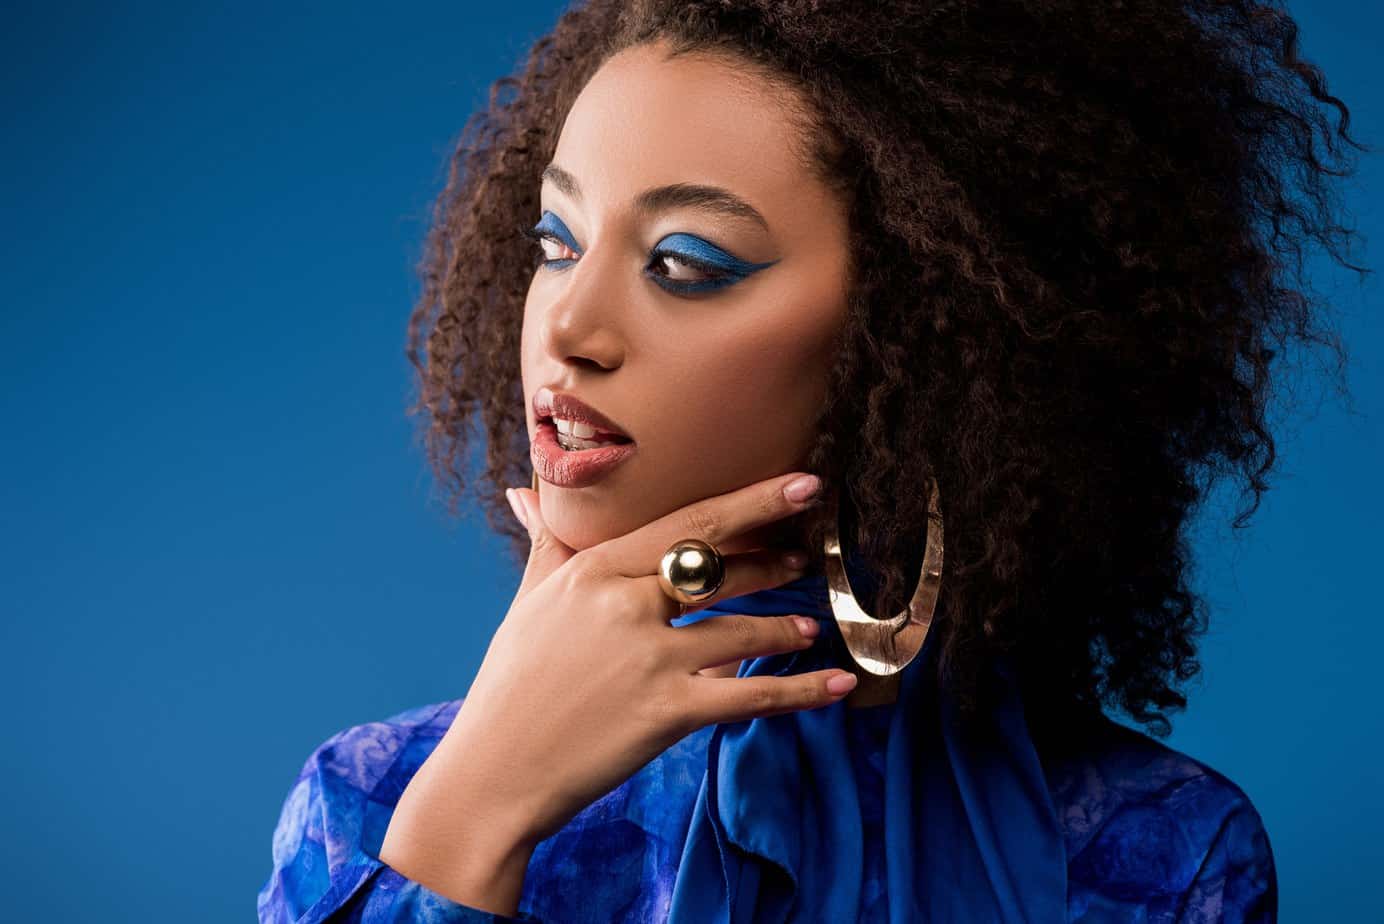 Beautiful African American wearing blue shirt, gold ear rings, and make-up after using rosemary oil for hair growth